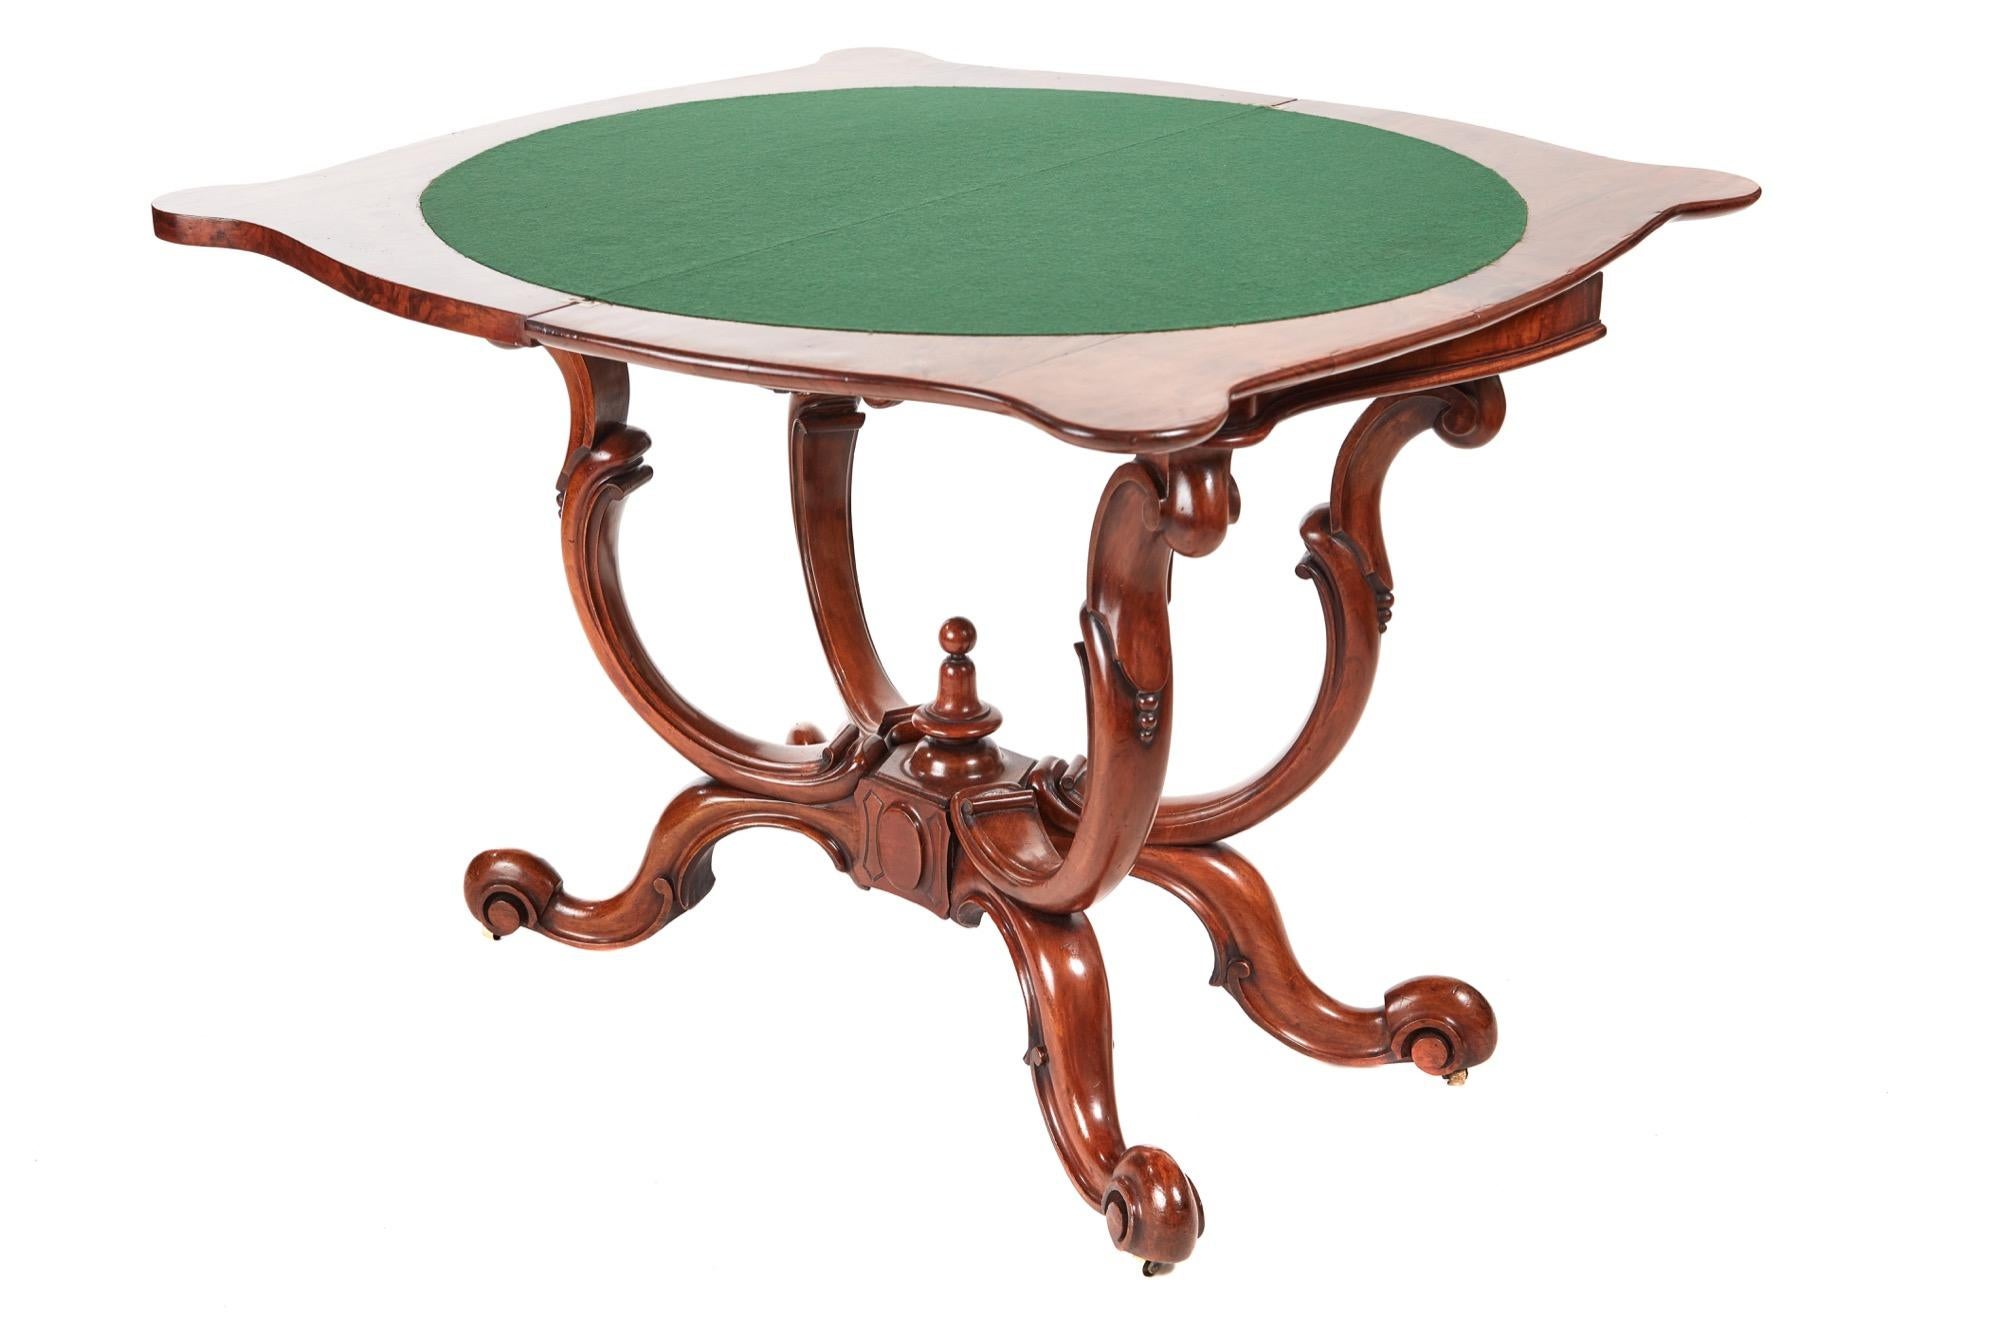 This is an unusual Victorian antique burr walnut basket base card table which has a burr walnut serptentine shaped swivel top with thumb moulded edge. It has a green baize interior with lovely carved walnut frieze. It has an unusual solid walnut